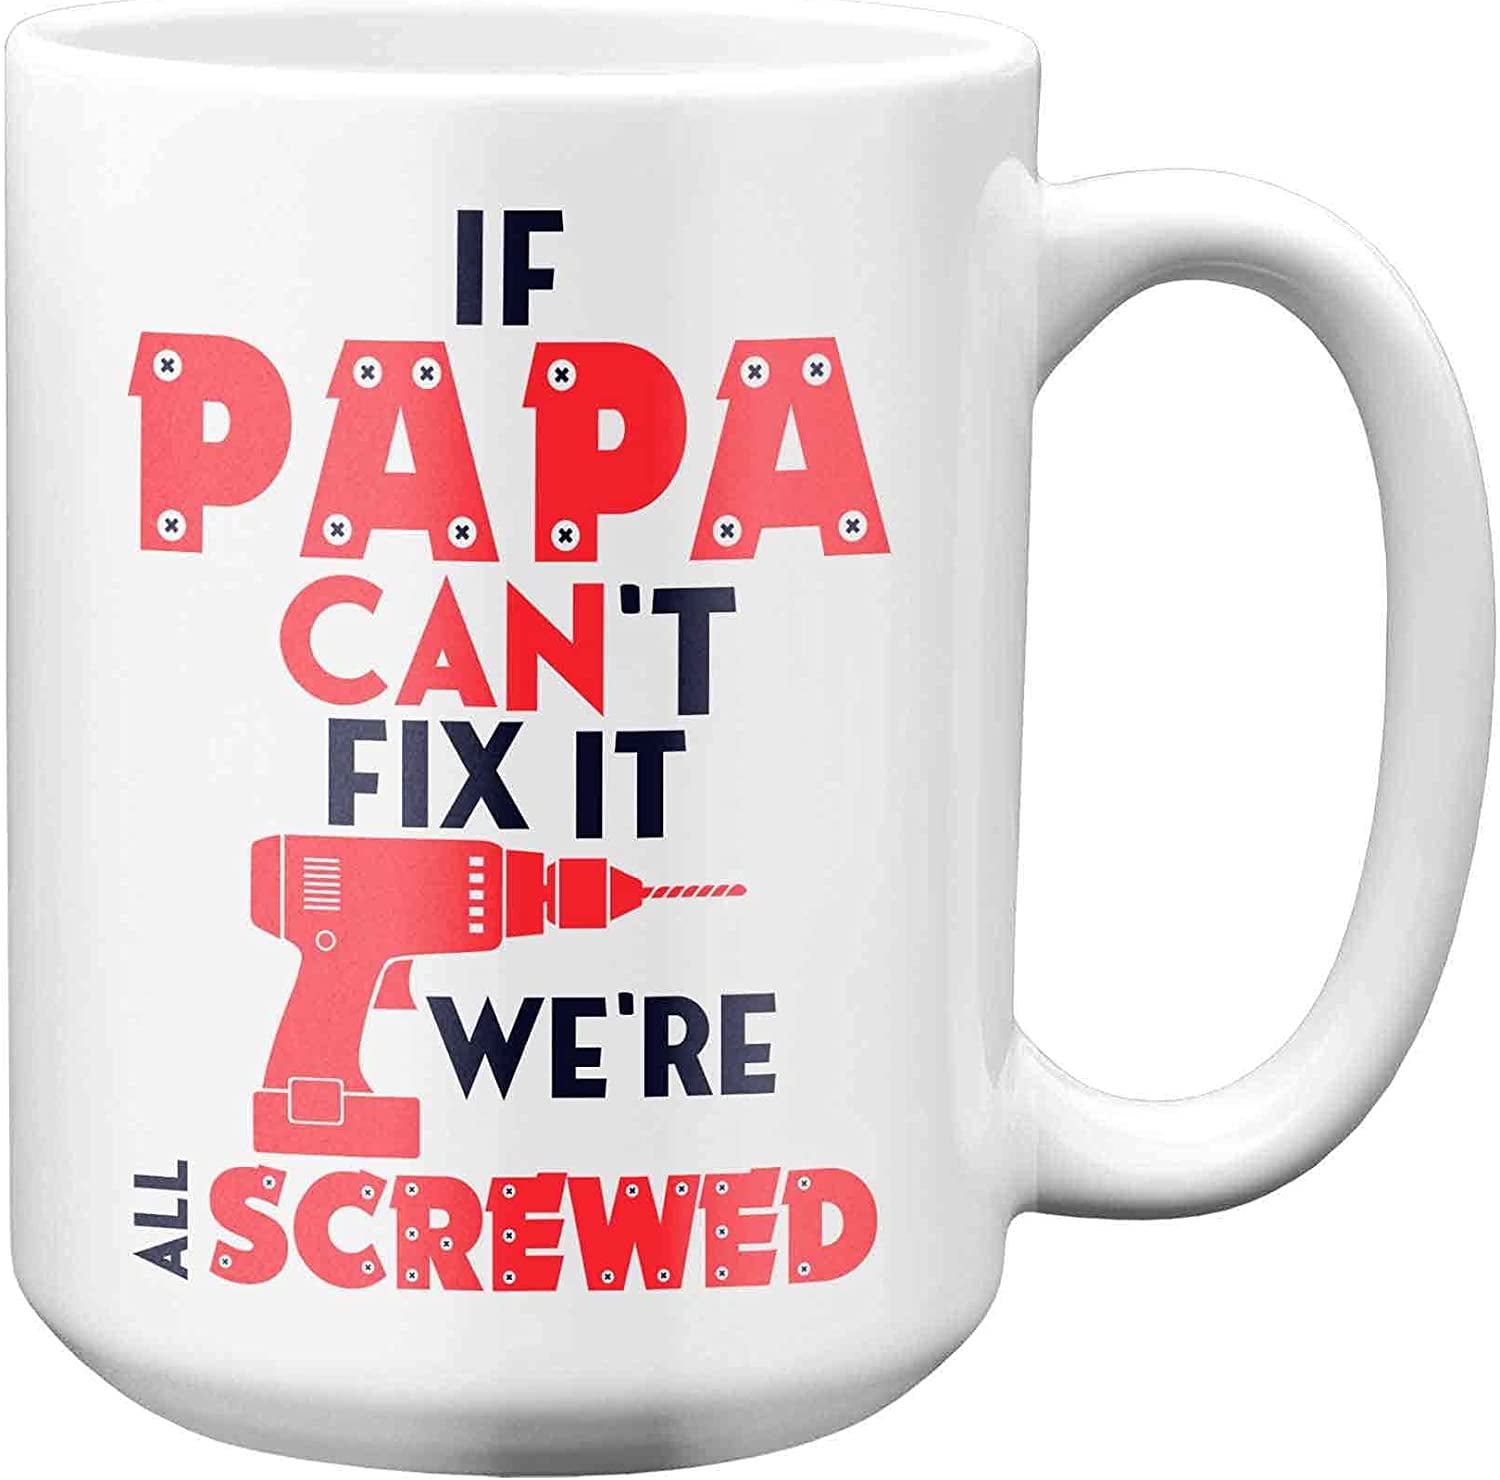 If My Daddy Can't Fix It We're All Screwed Tools Funny Ceramic White Coffee Mug 